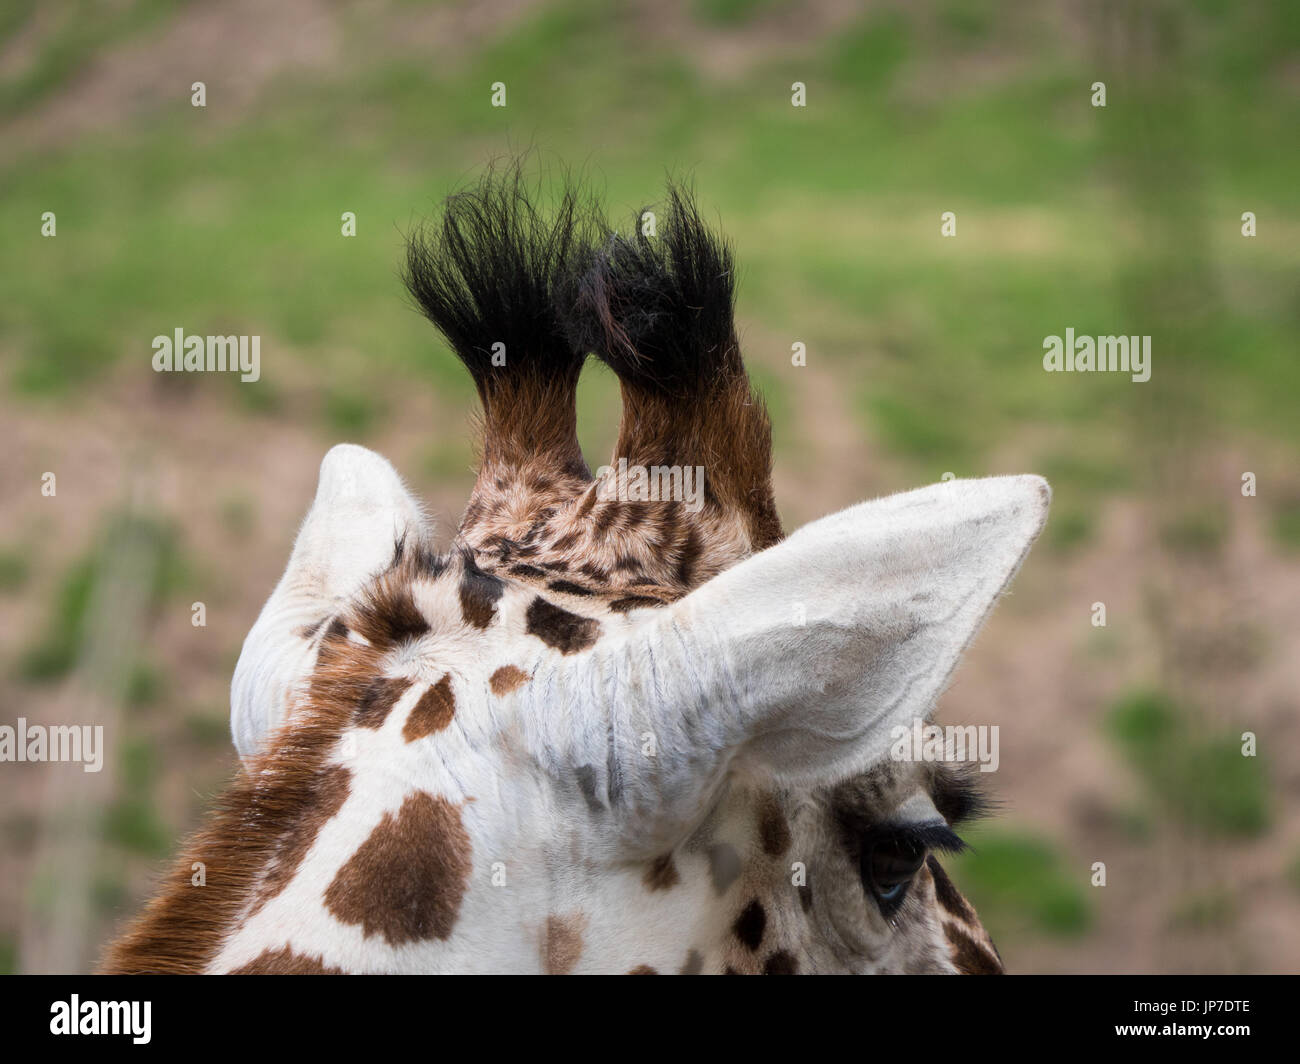 Close-up view of the back of a giraffe's head with his ossicones clearly visible Stock Photo